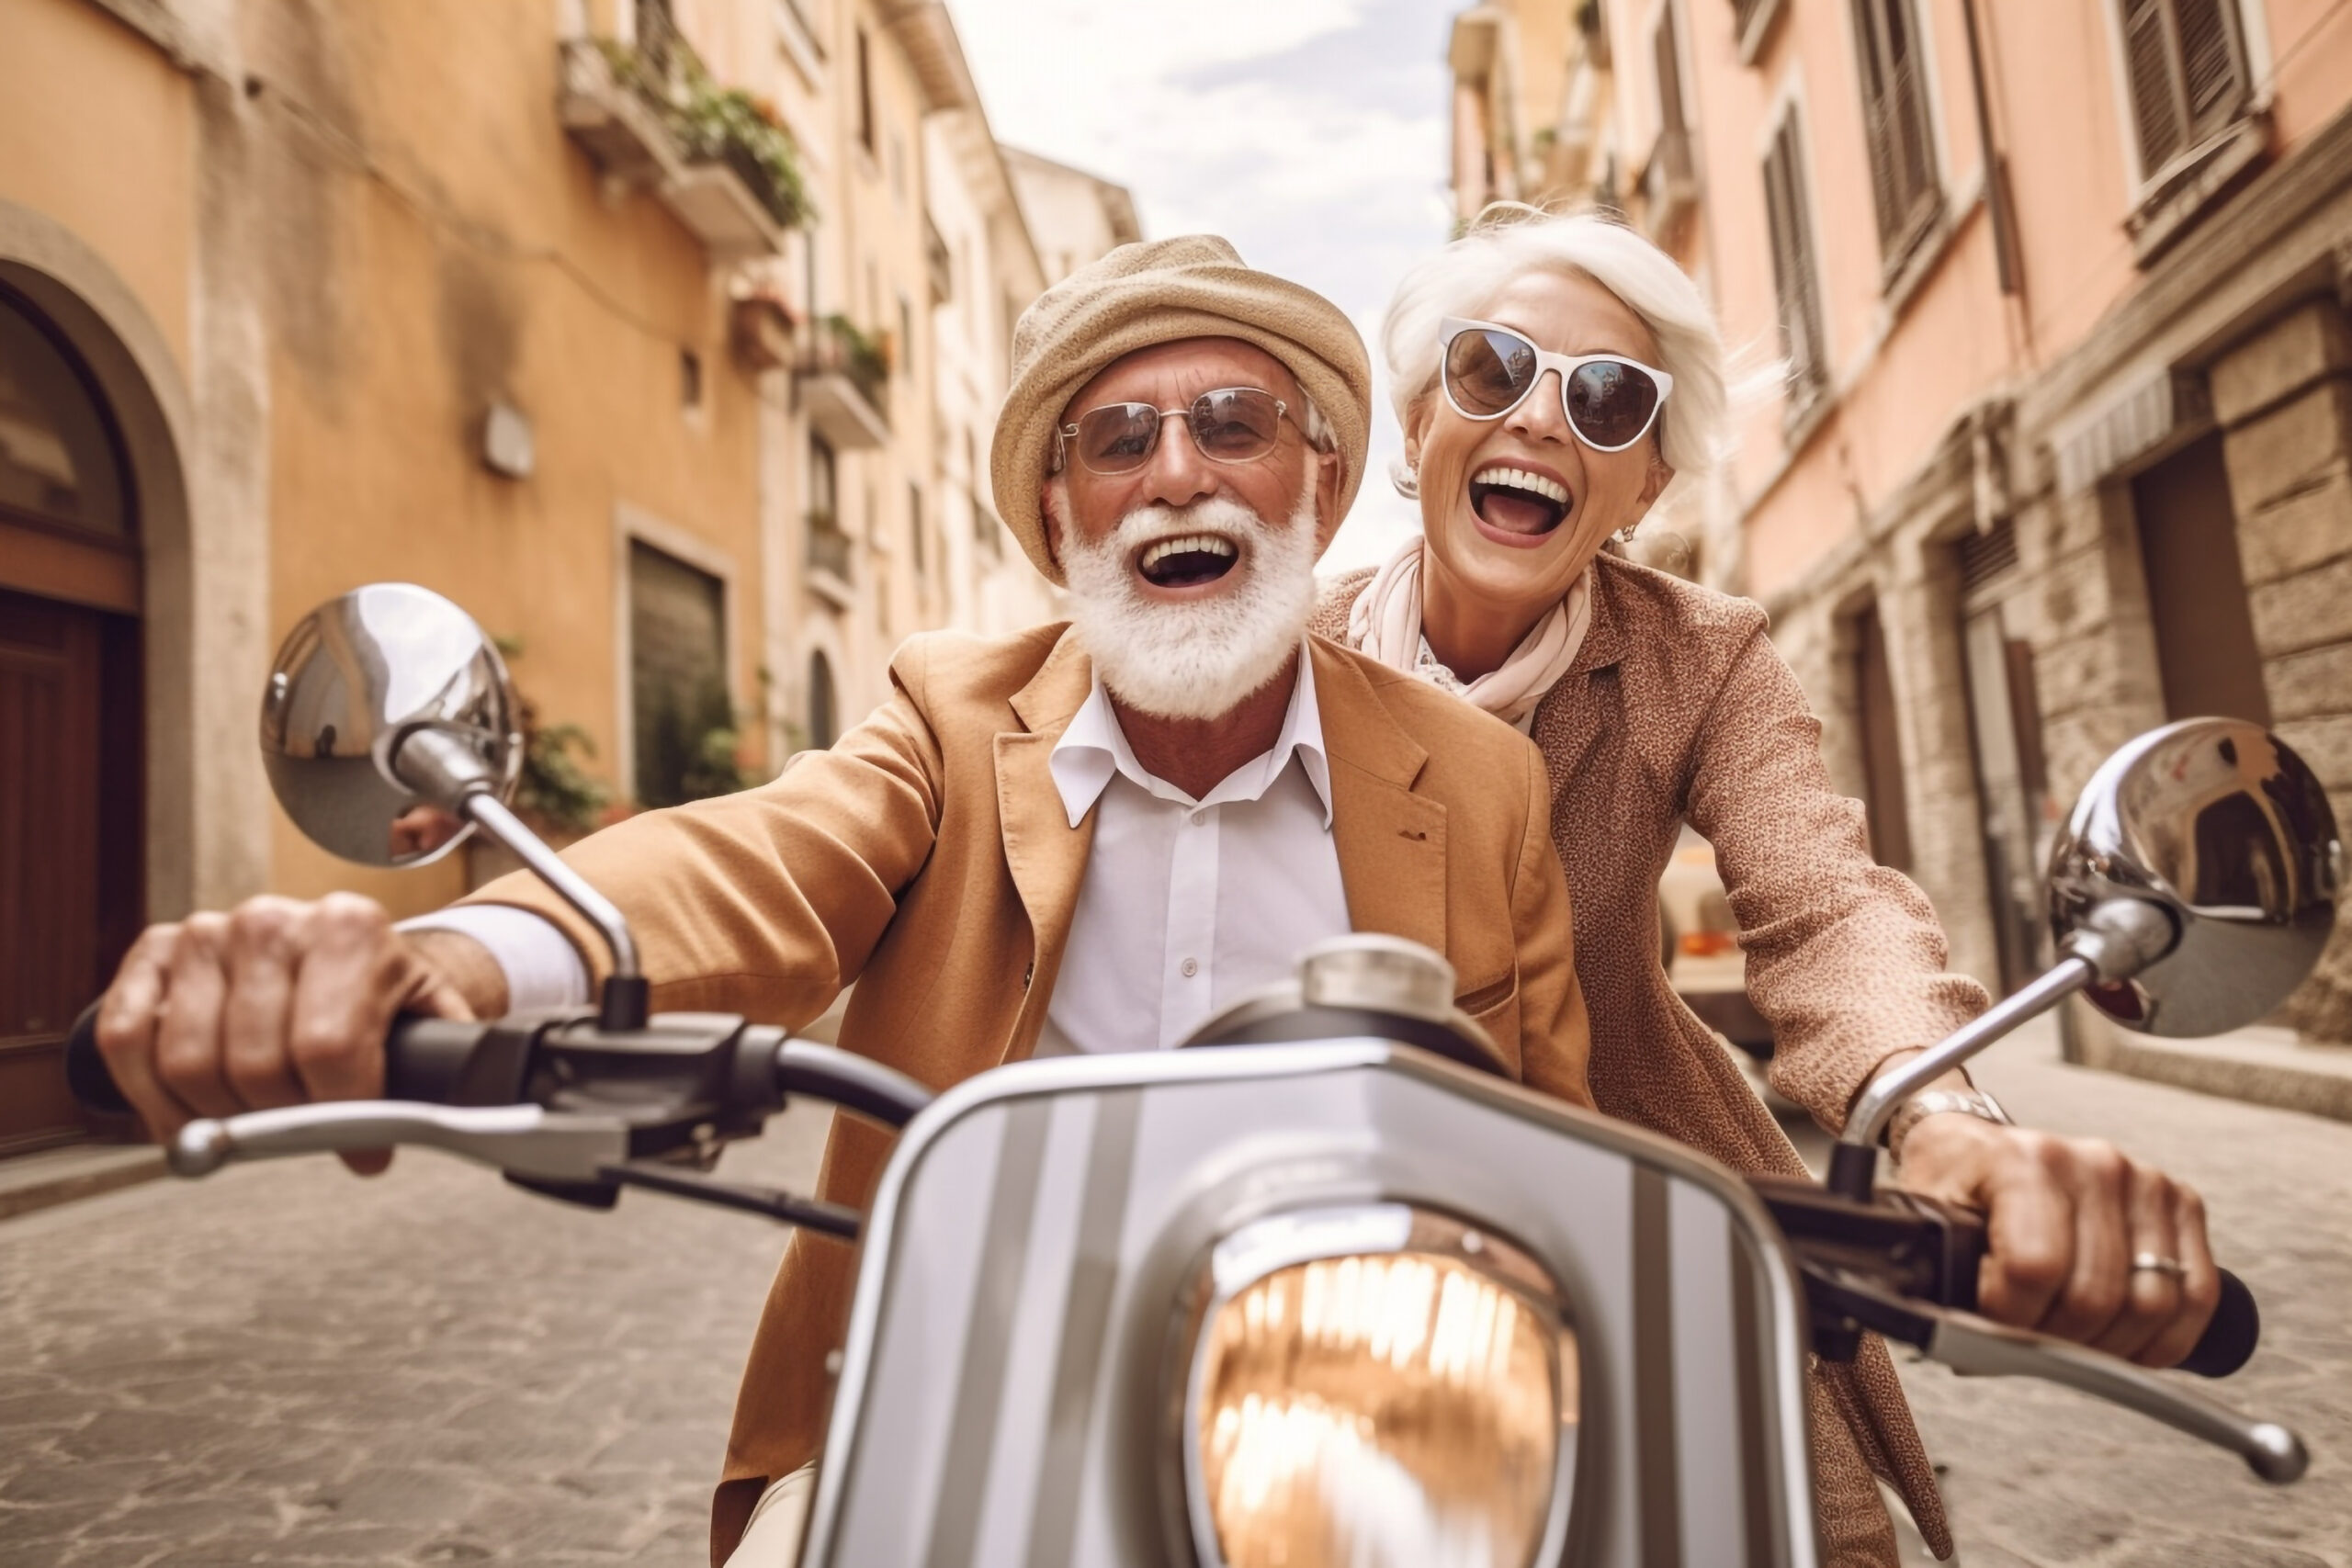 Finding financial freedom in retirement.